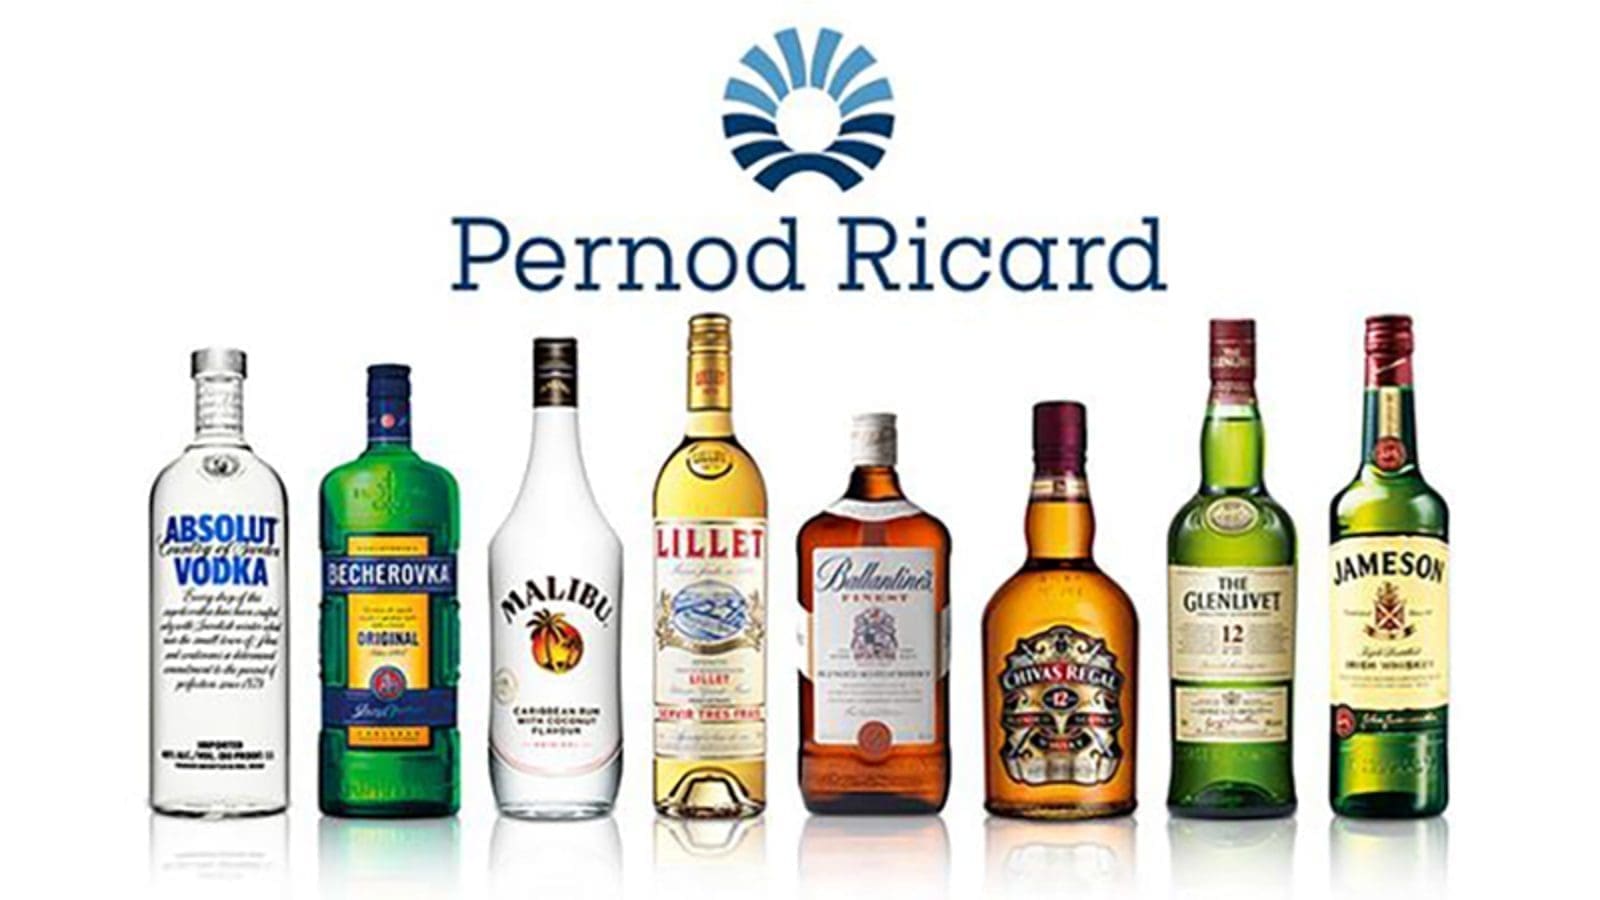 Pernod Ricard to build US$250m carbon-neutral distillery in Kentucky